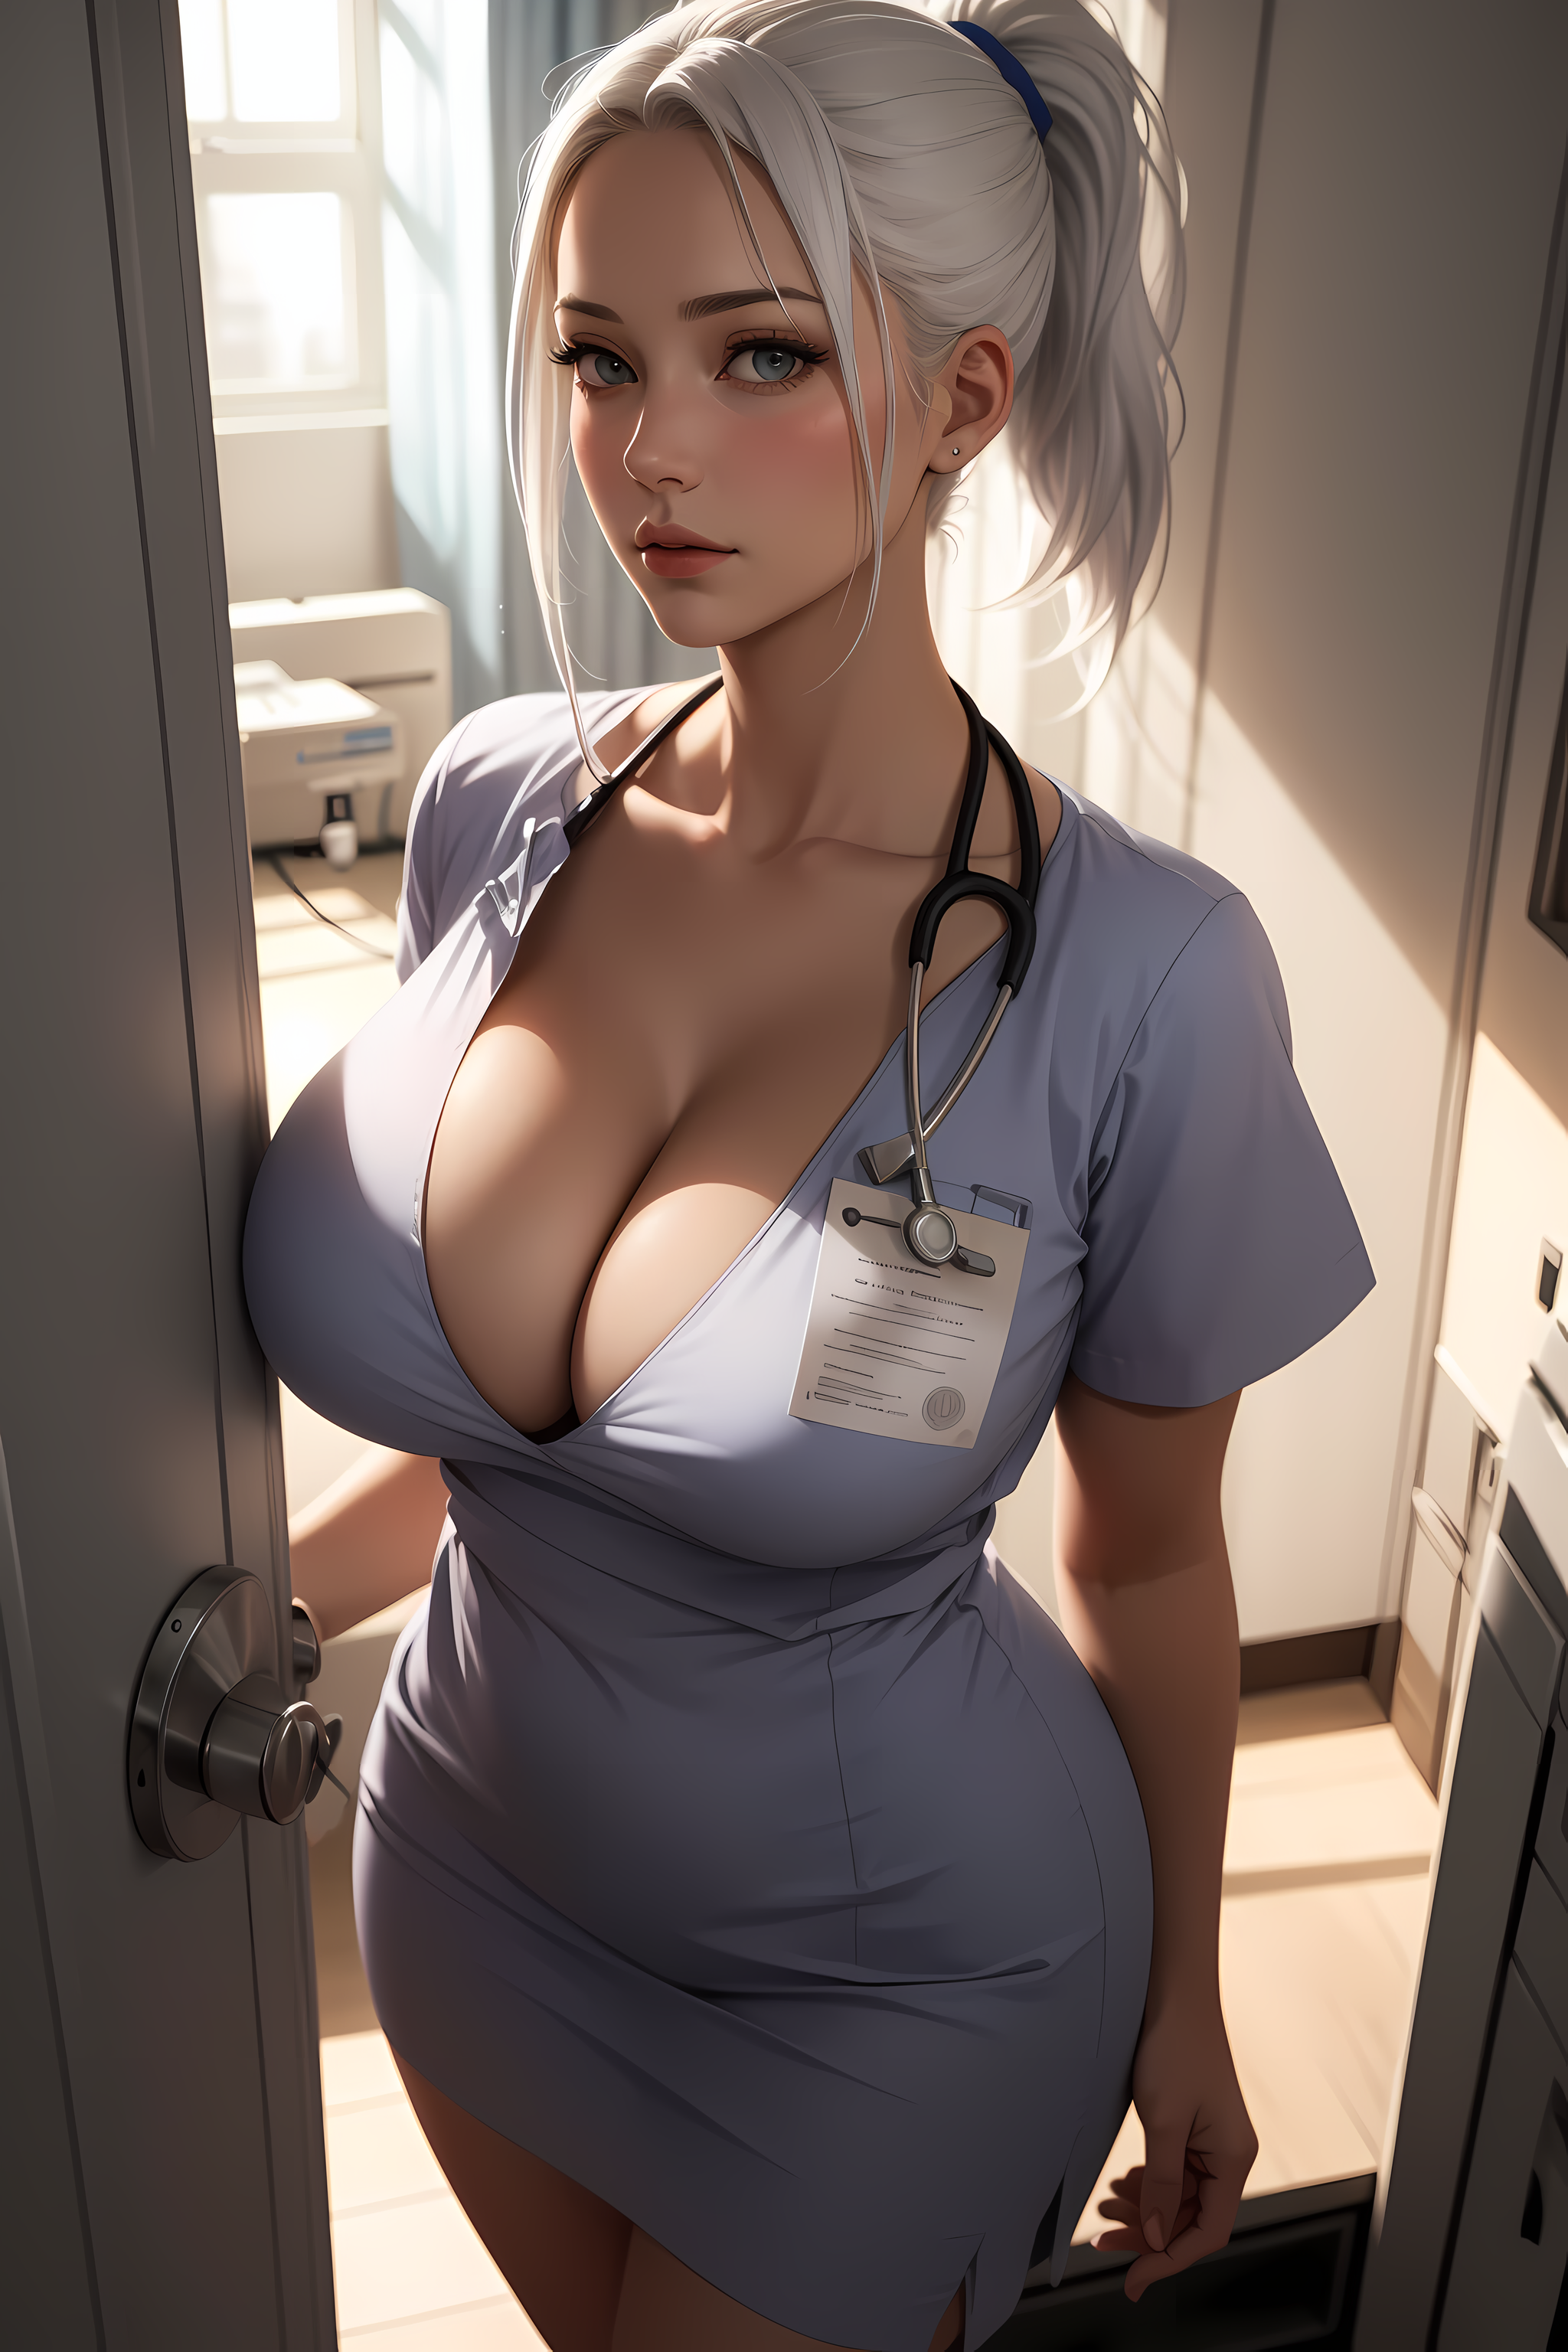 Your Nurse will be in to see